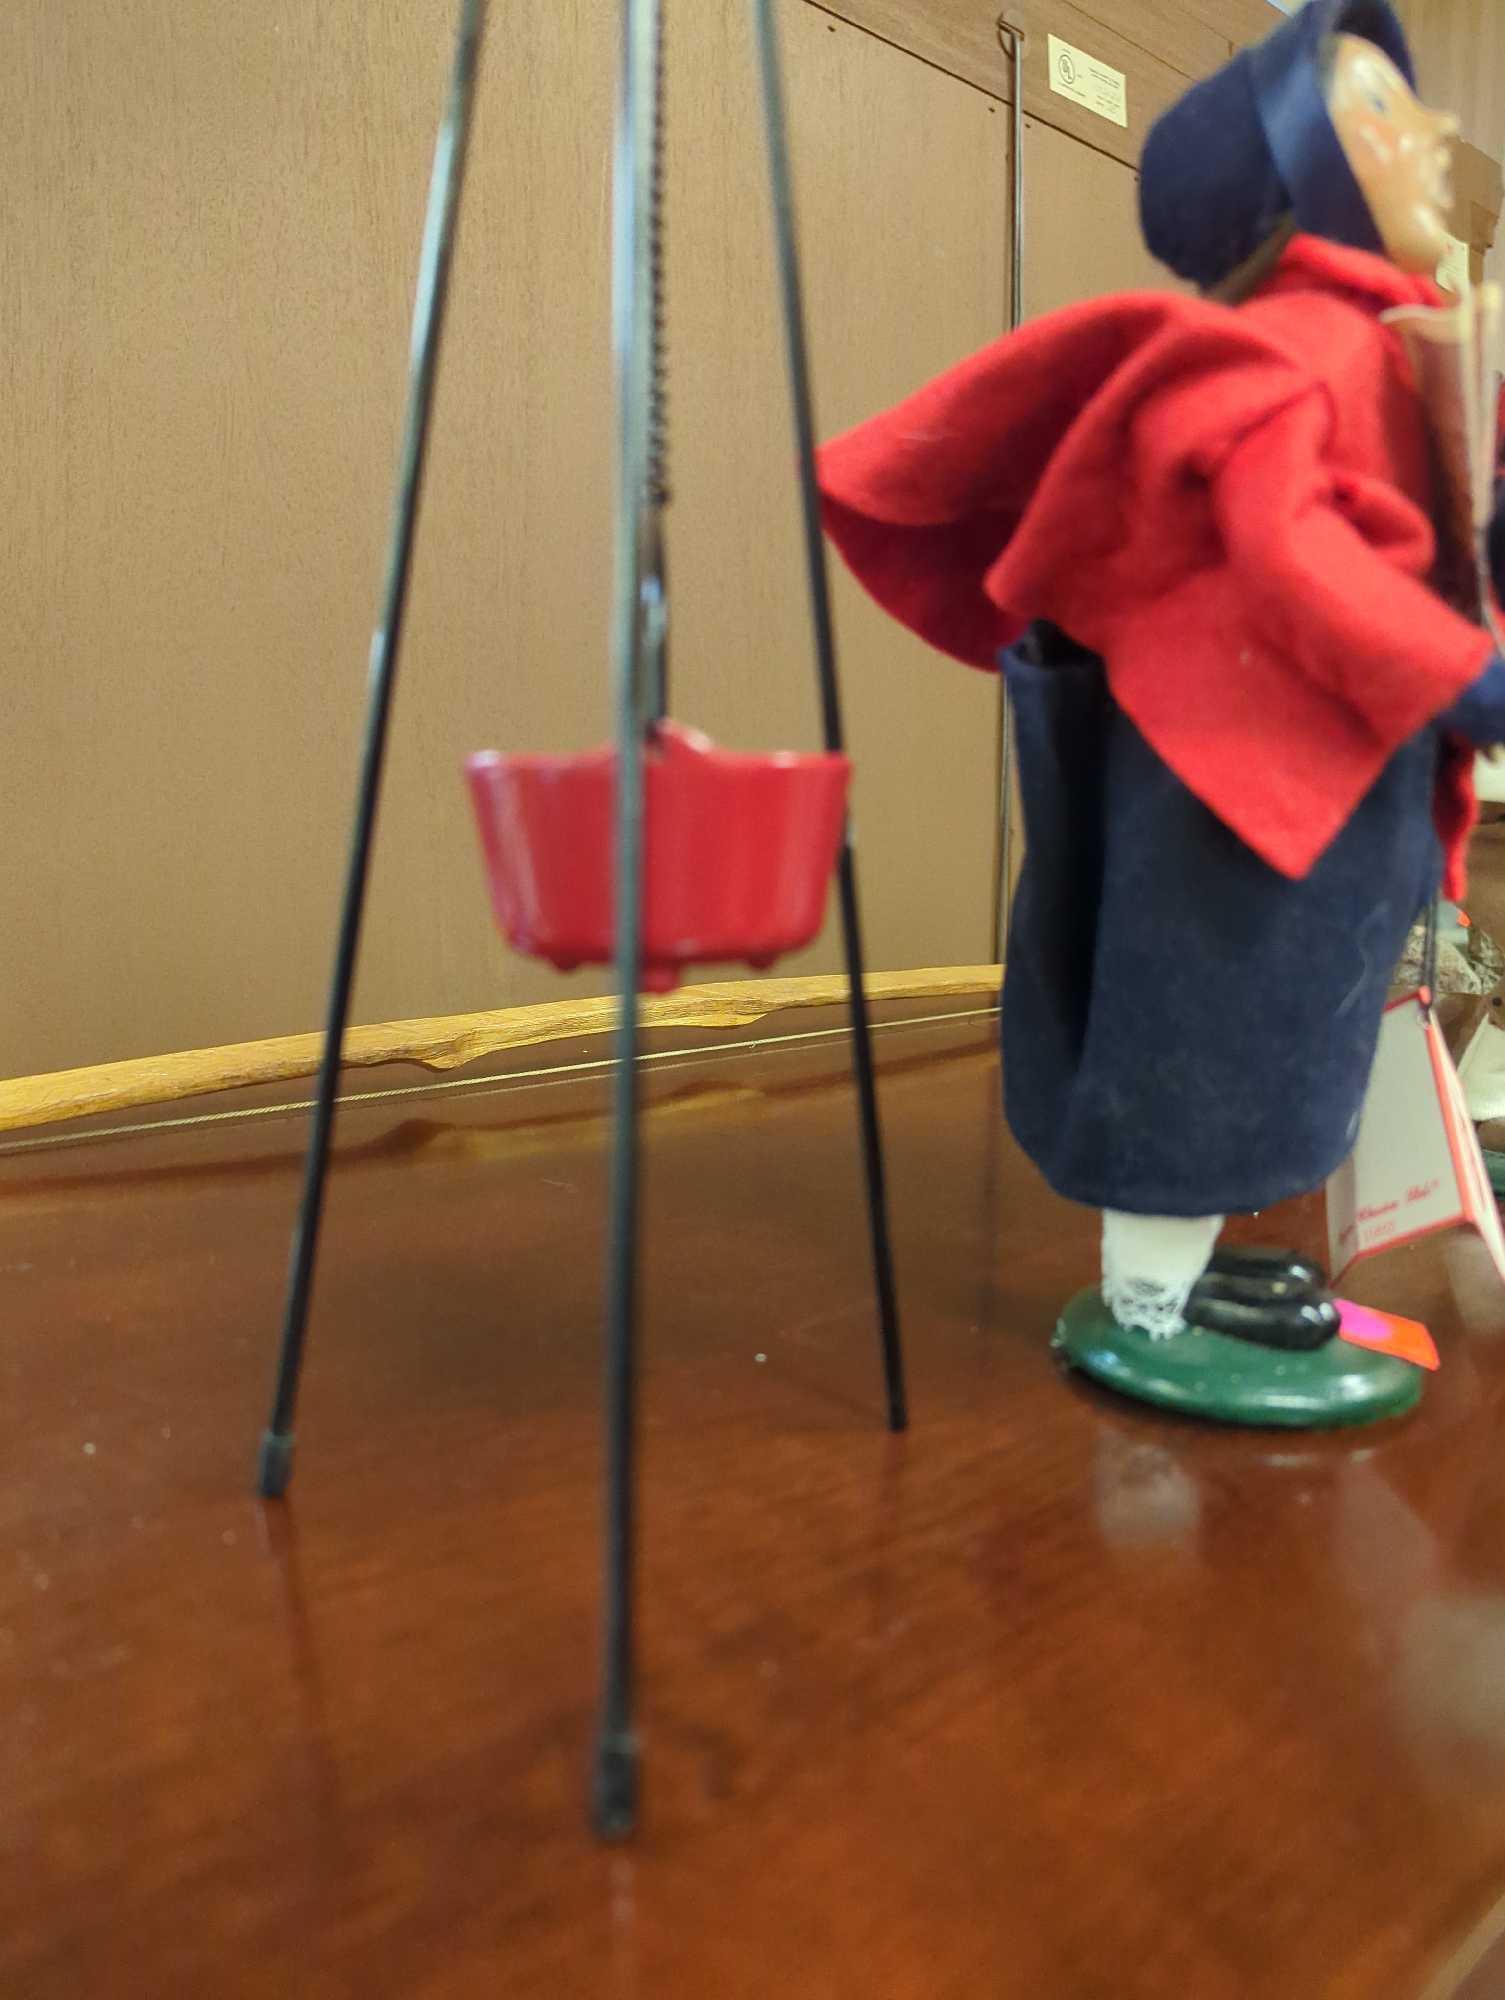 Byers' Choice Caroler Salvation Army Girl Holding The War Cry (1992) With The Salvation Army Tripod